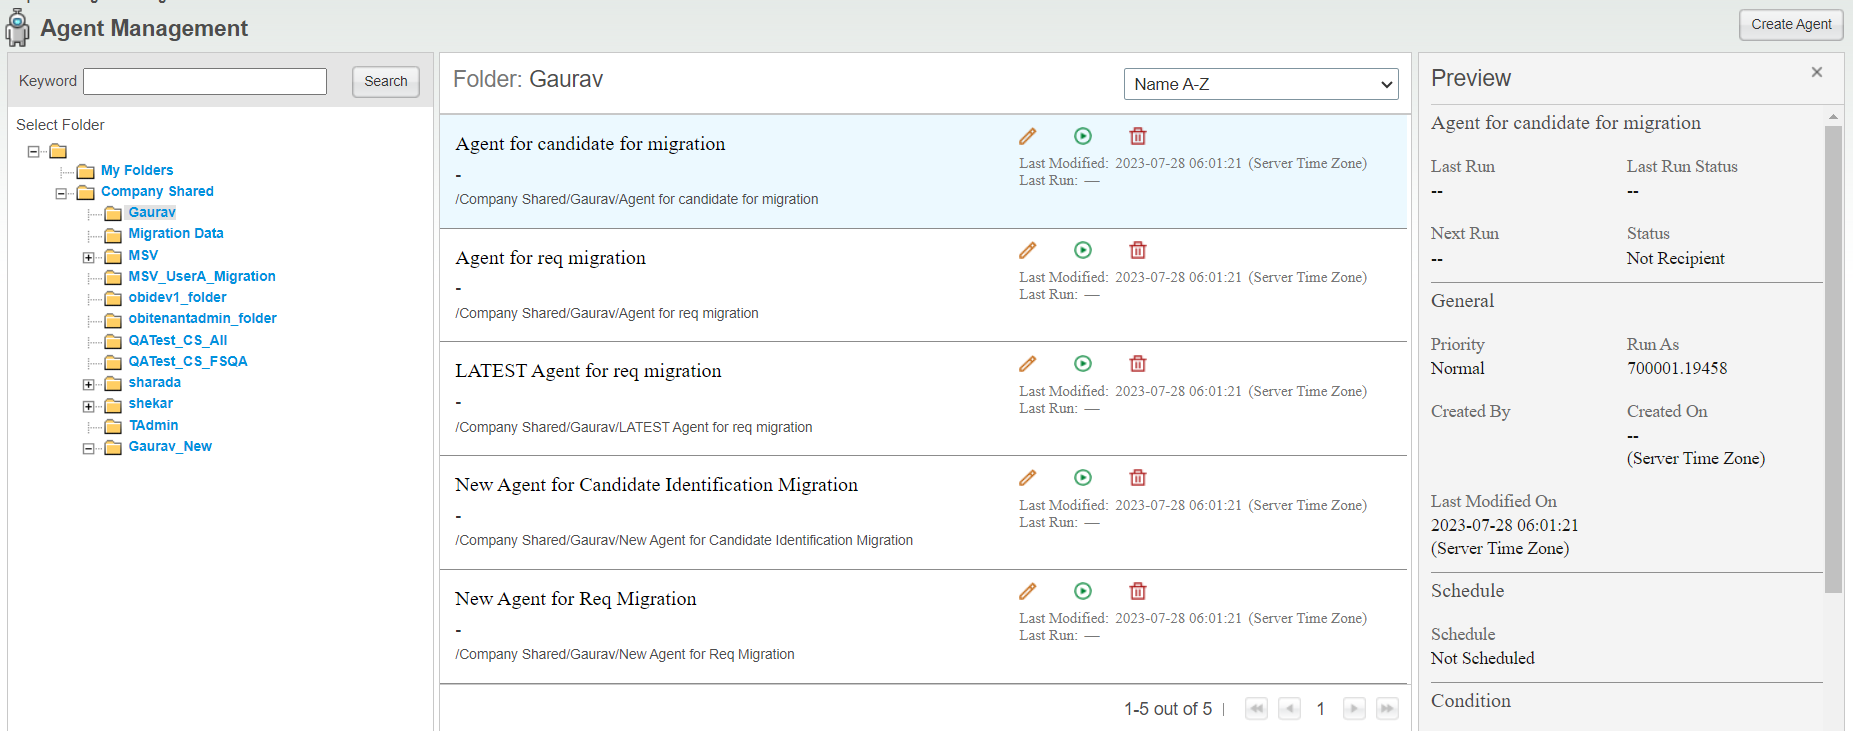 The image shows the Agent Management page in Oracle Analytics.